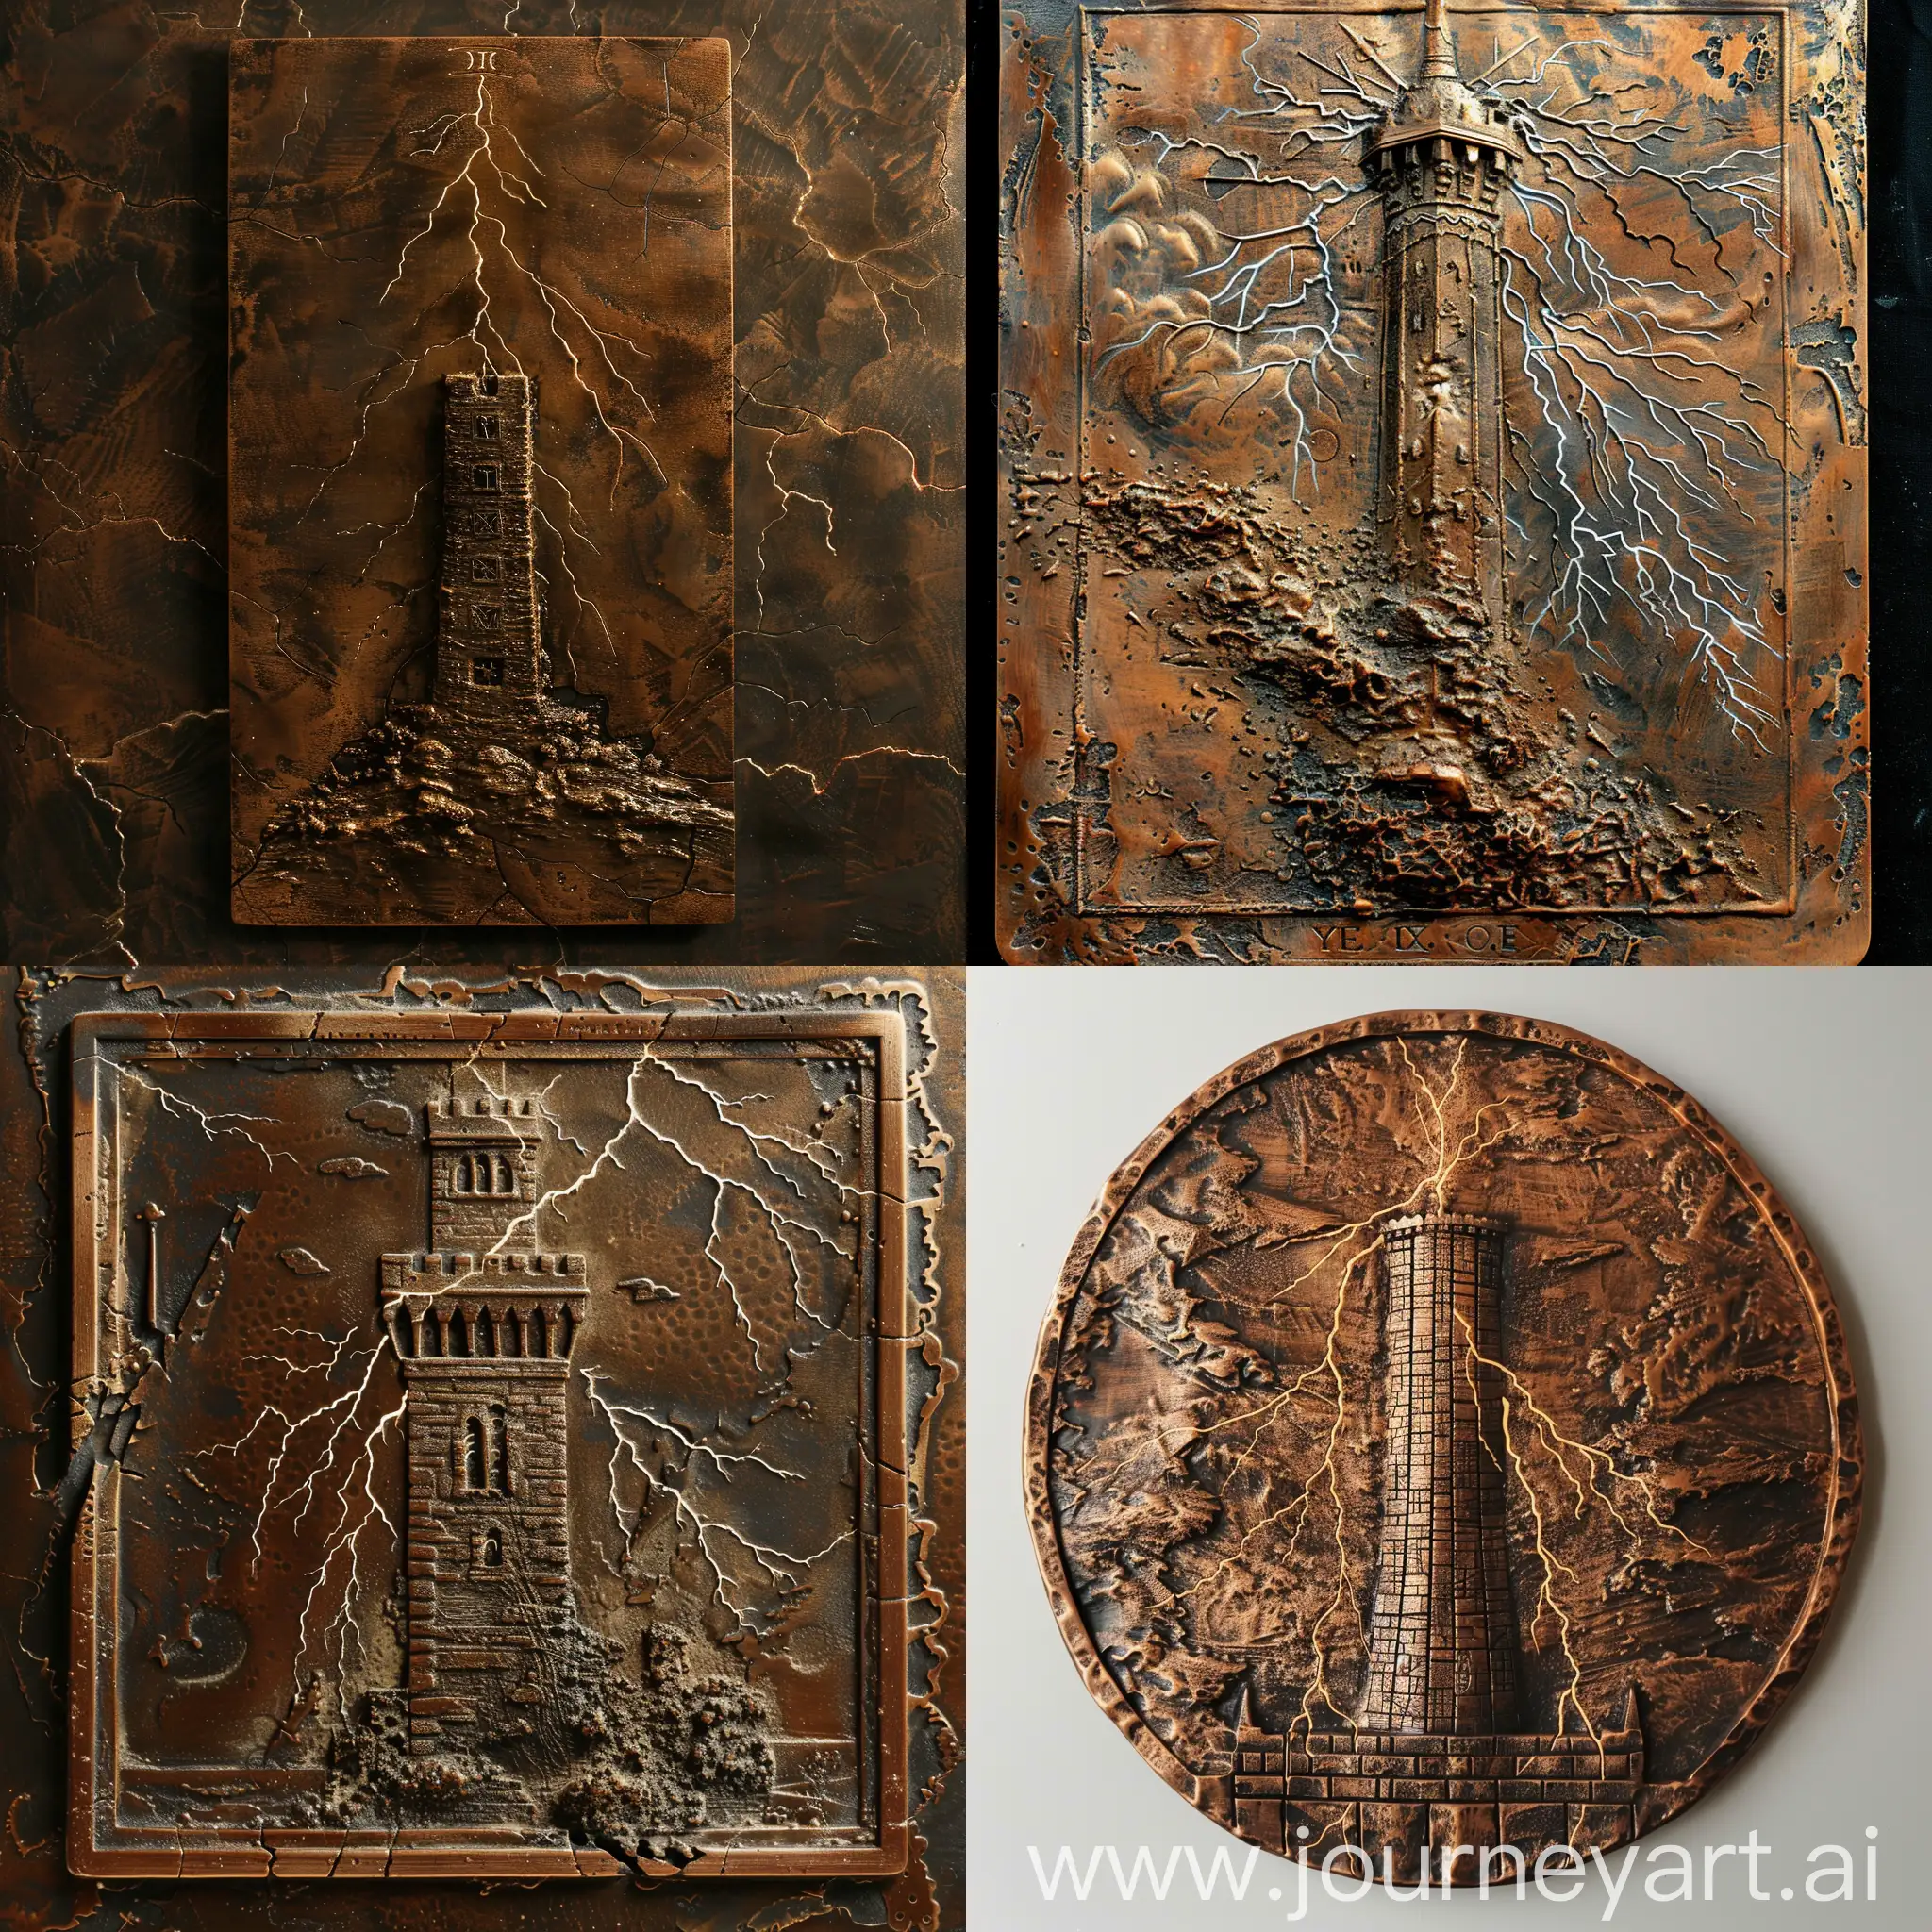 Bas-relief on a copper plate, award-winning, Lightning: Italian Tarot (The Tower struck by lightning), Lightning strikes the tower, minimalistic, symbolism, conceptual, copper textured. YOW:0,0